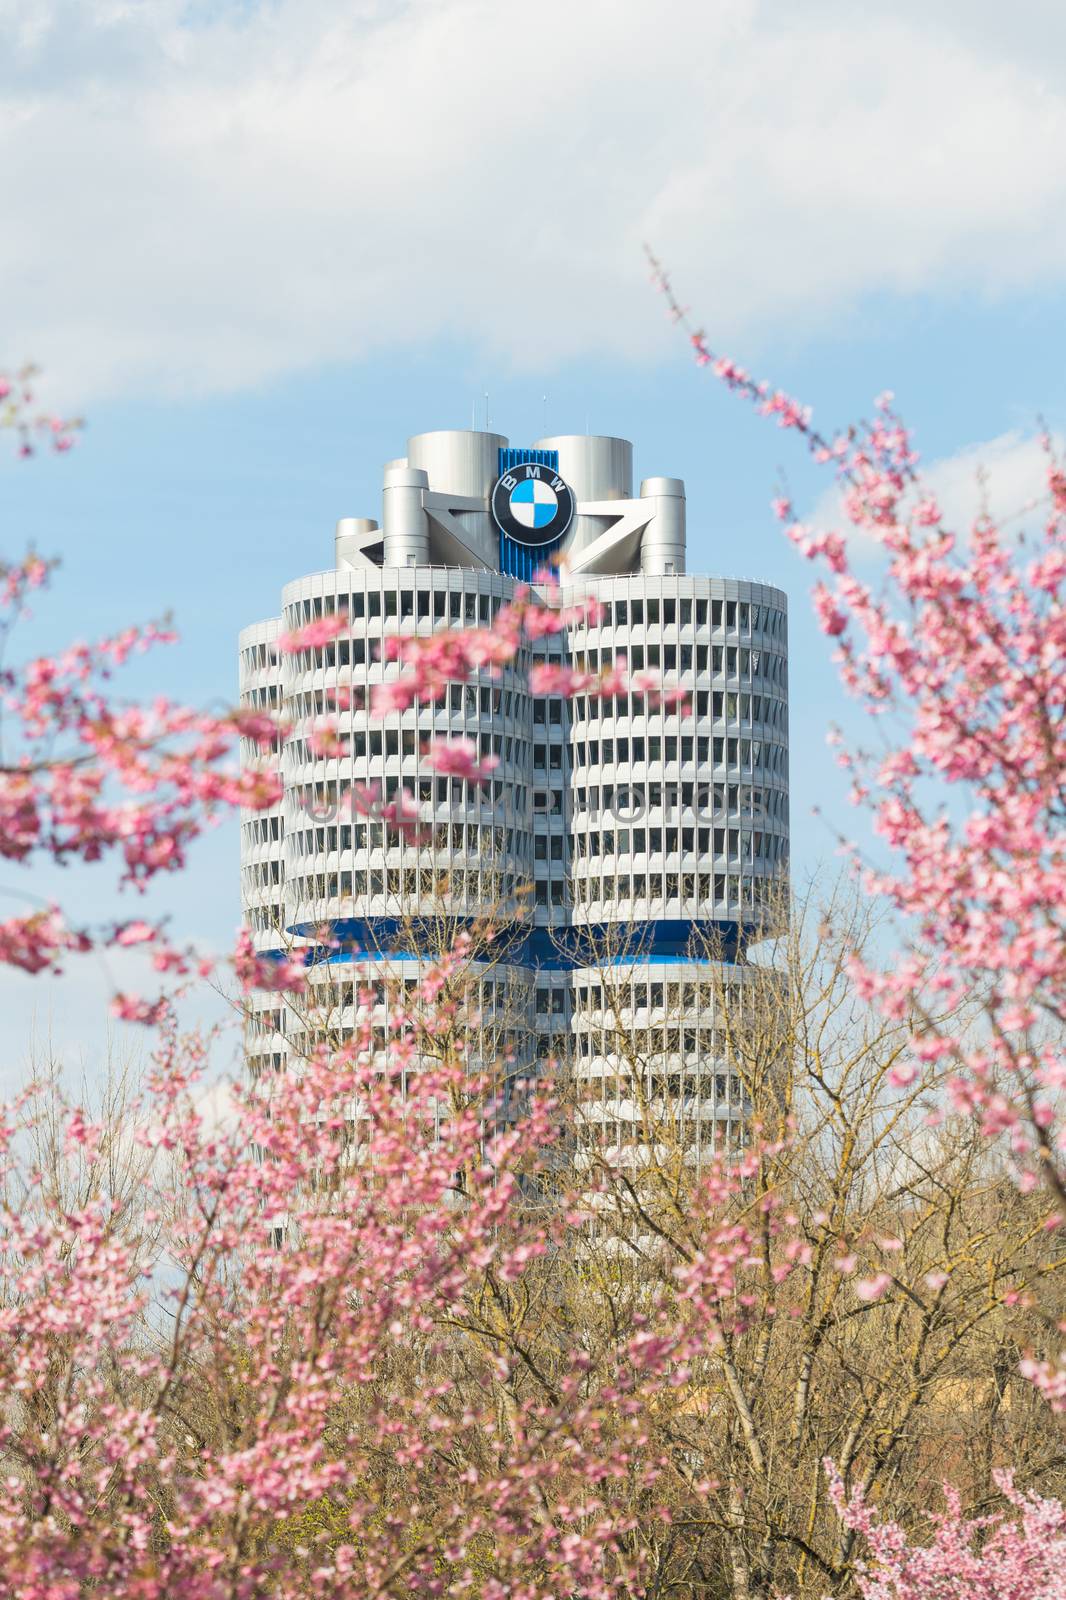 Munich, Germany - April 12, 2015: BMW headquarters high-rise tower office building in spring blossoming Olympiapark.